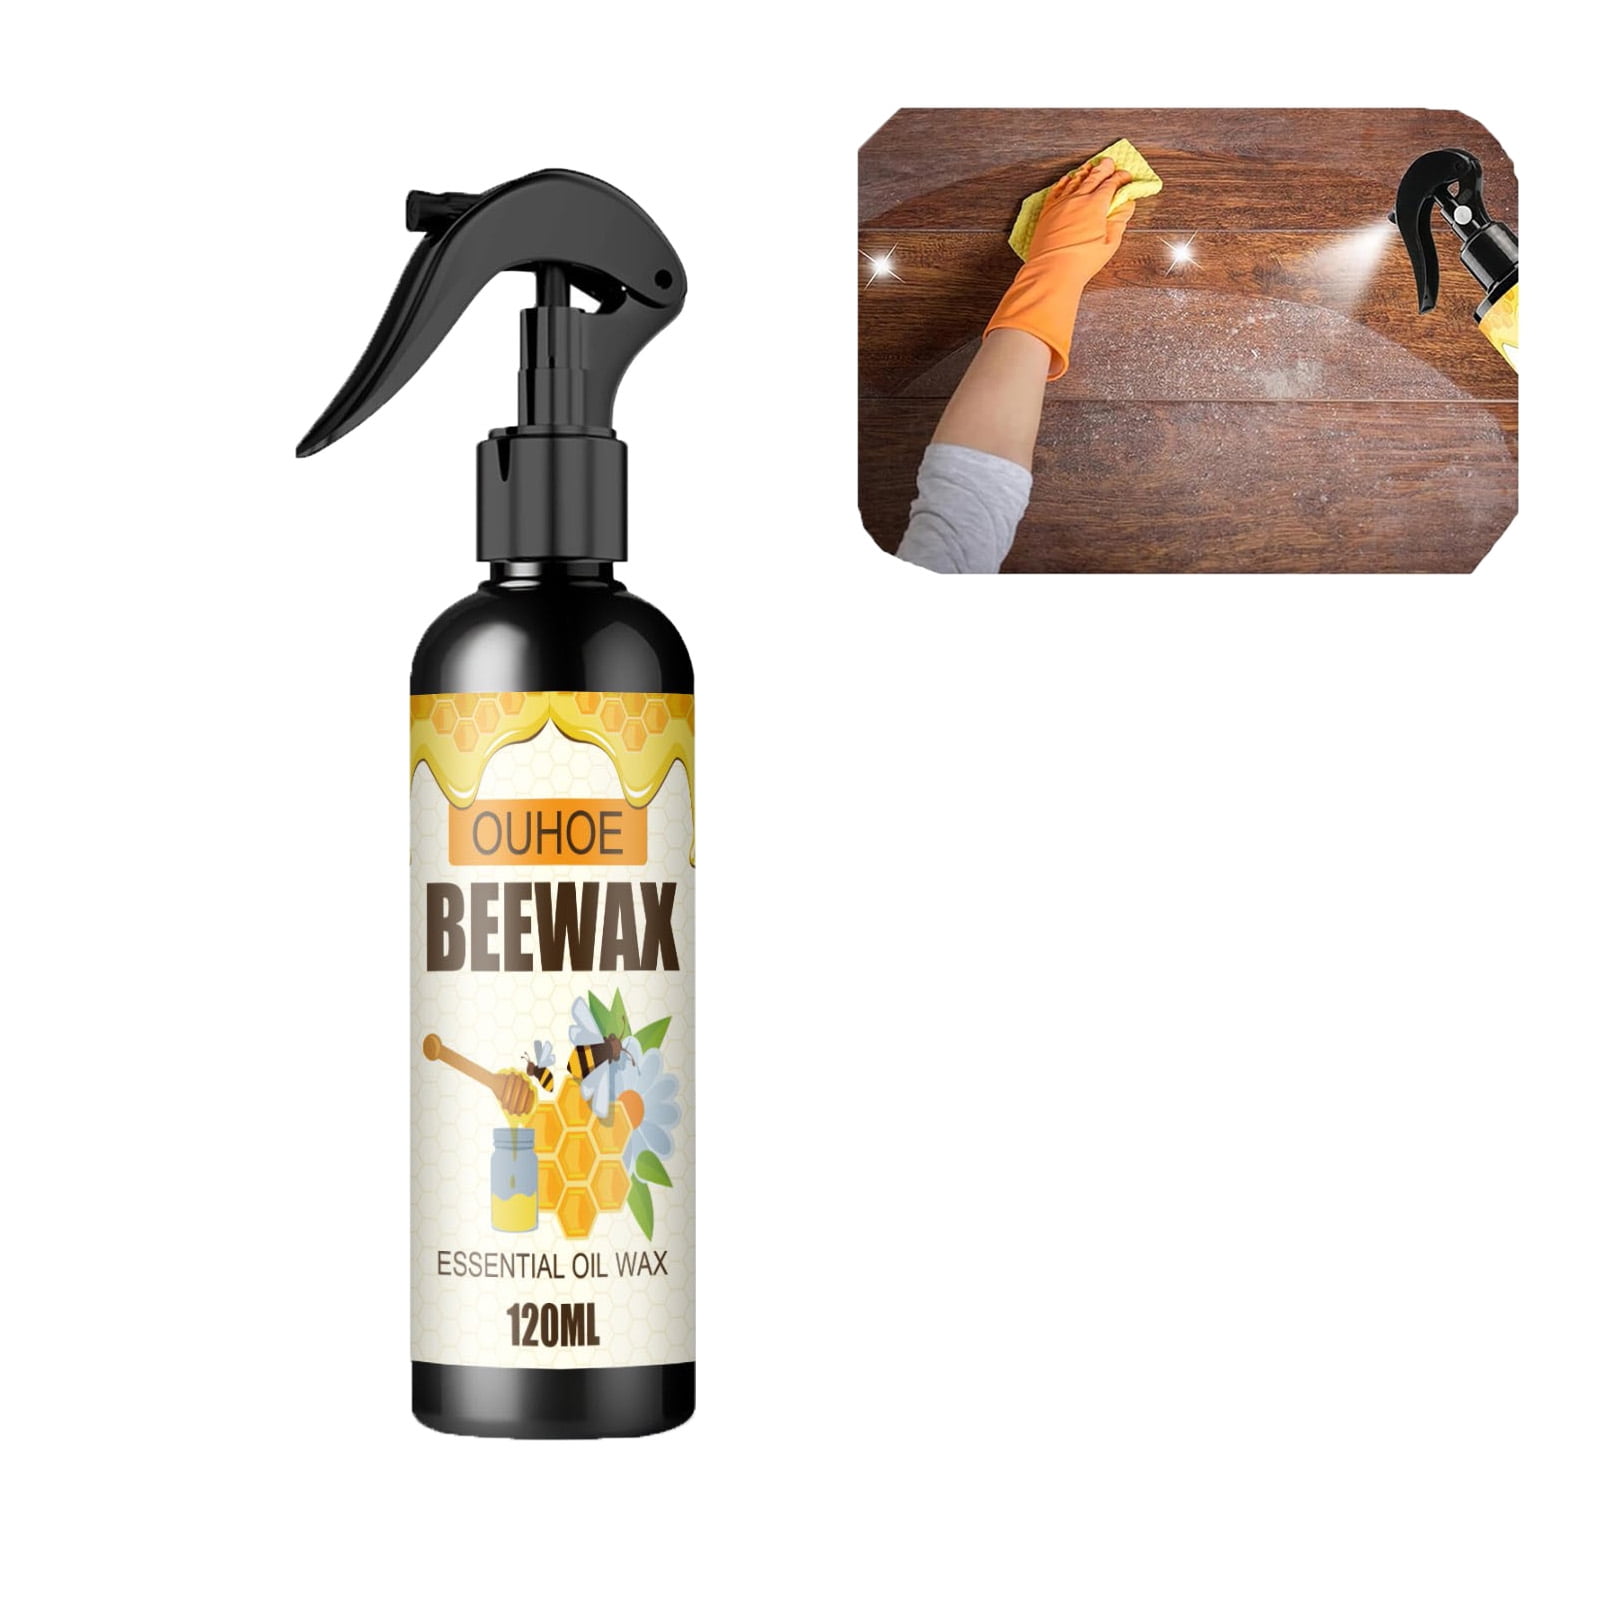  Mvsdiscv 1pc Natural Micro-Molecularized Beeswax Spray, Beeswax  Furniture Polish, Multipurpose Wood Floor Cleaner and Polish for Furniture,  Floor, Tables, Chairs, Cabinets 120ML : Health & Household